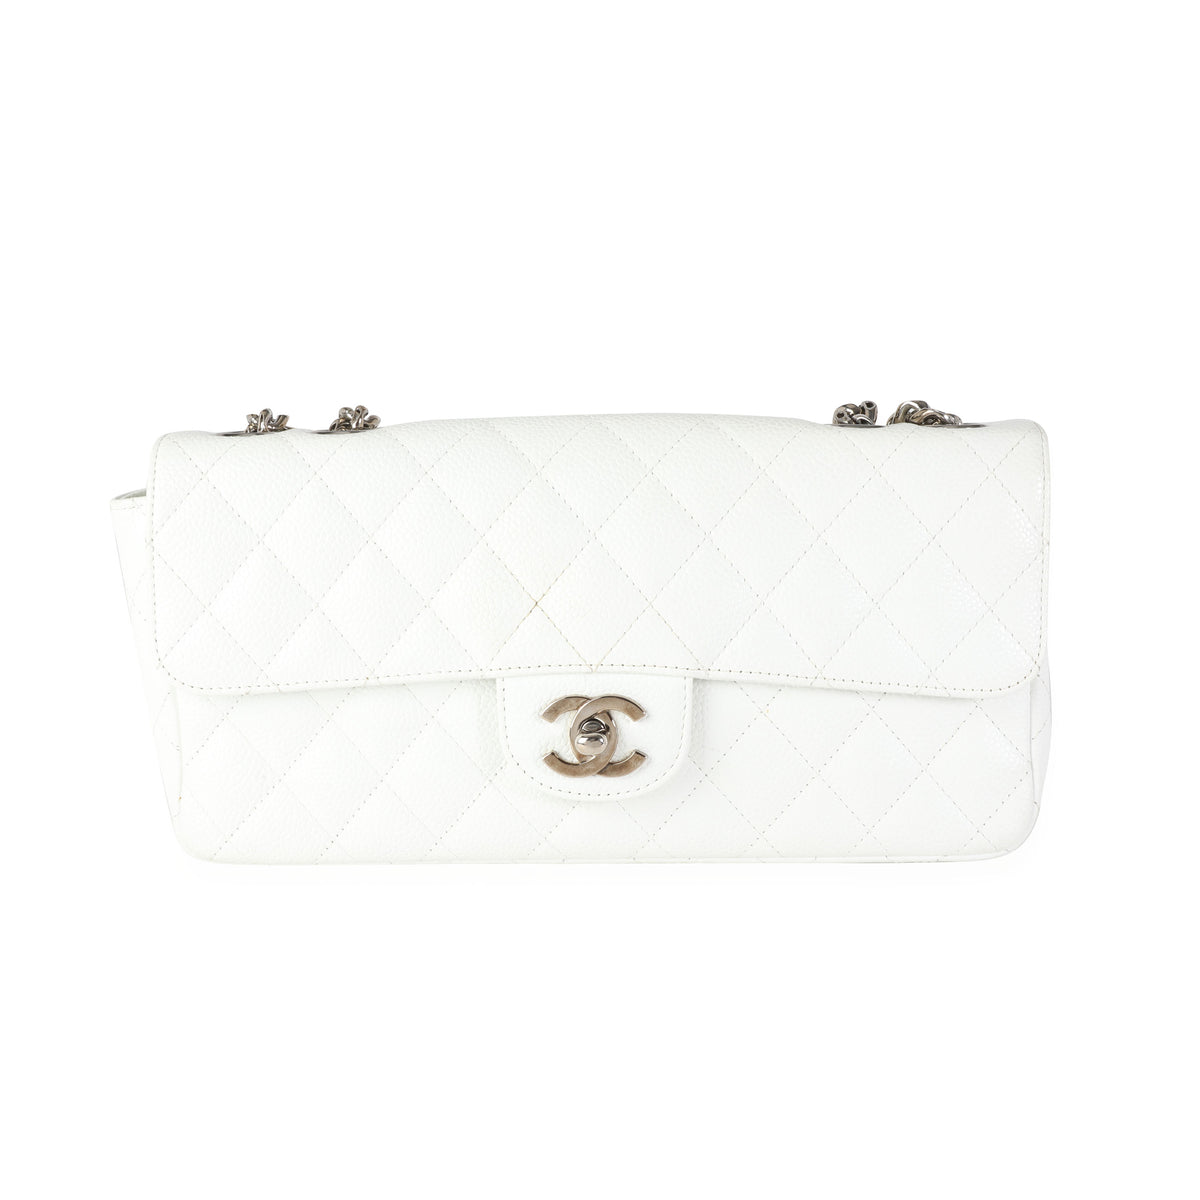 Chanel White Caviar Quilted East West Bijoux Single Flap Bag